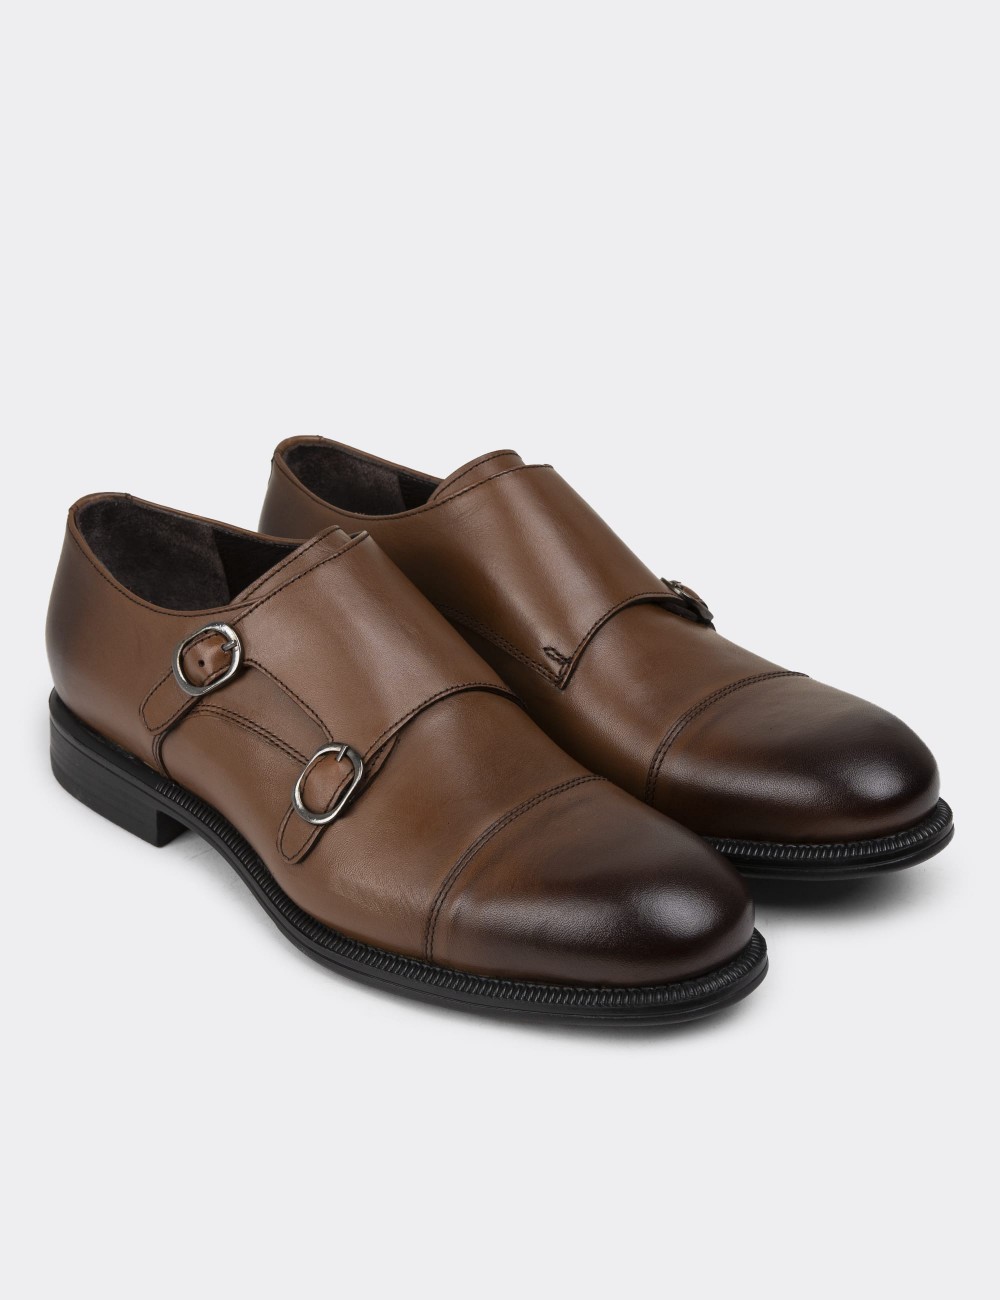 Tan Leather Double Monk-Strap Classic Shoes - 01838MTBAC01